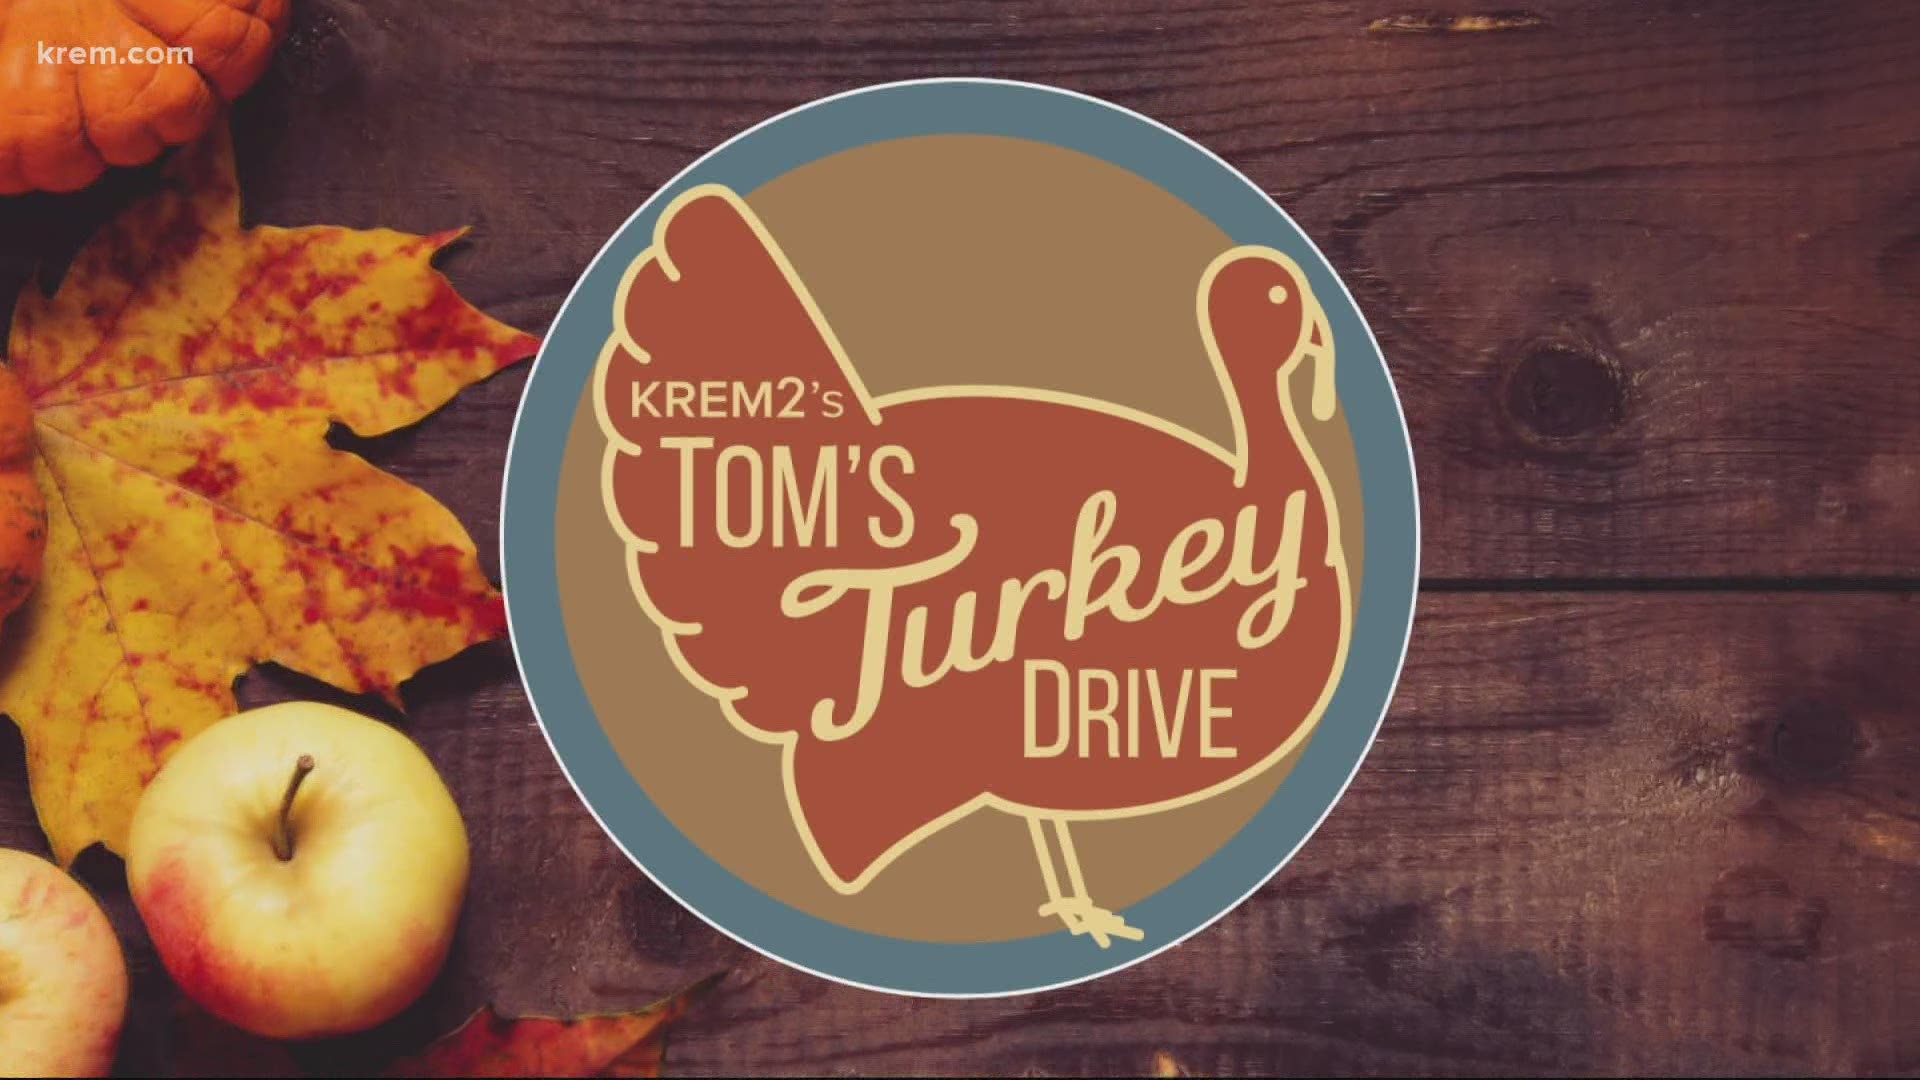 We have been asked by Second Harvest to feed eleven thousand families this year through Tom's Turkey Drive.